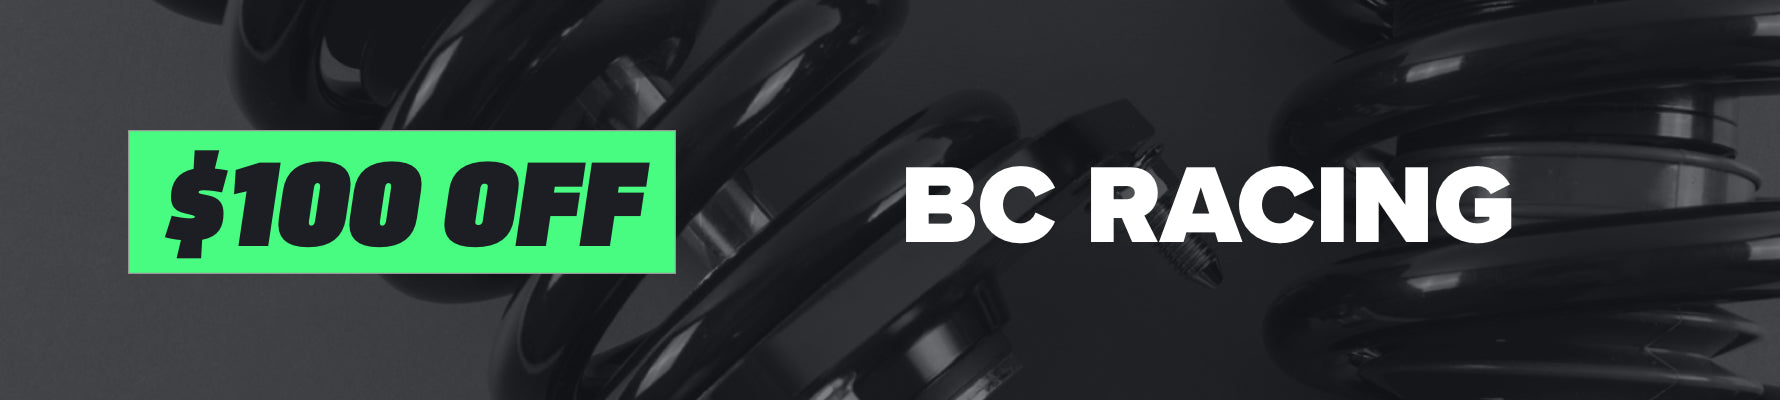 BC Coilovers Black Friday Sale